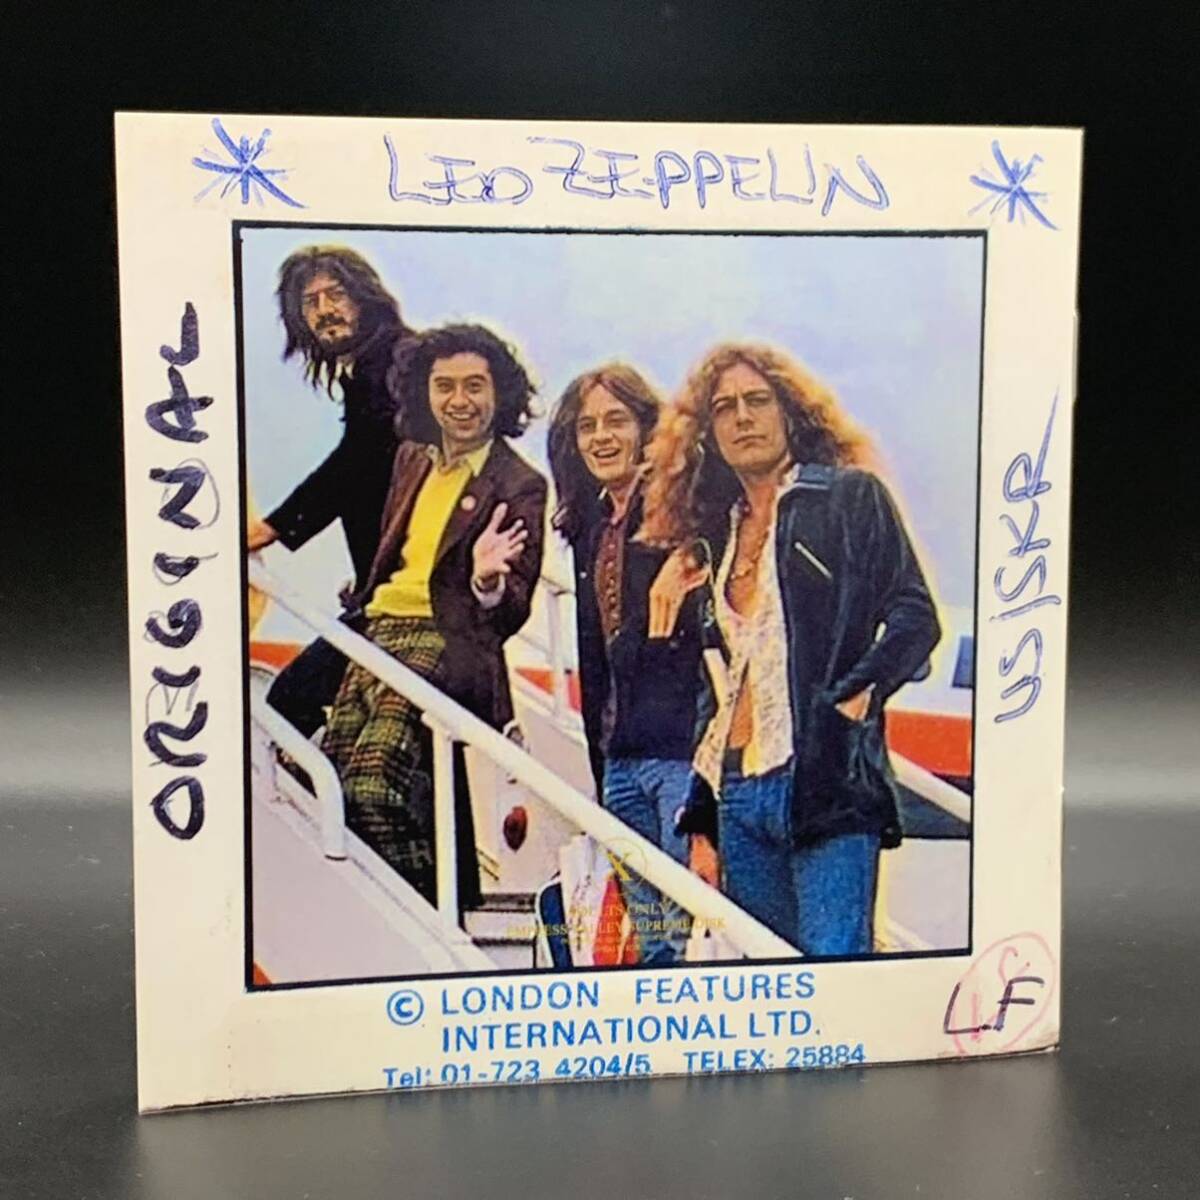 LED ZEPPELIN / JET STREAM - Pro Use Only 4CD Box with Booklet Set : Super Rare!! Hard to Find!! For enthusiastic collector only!!